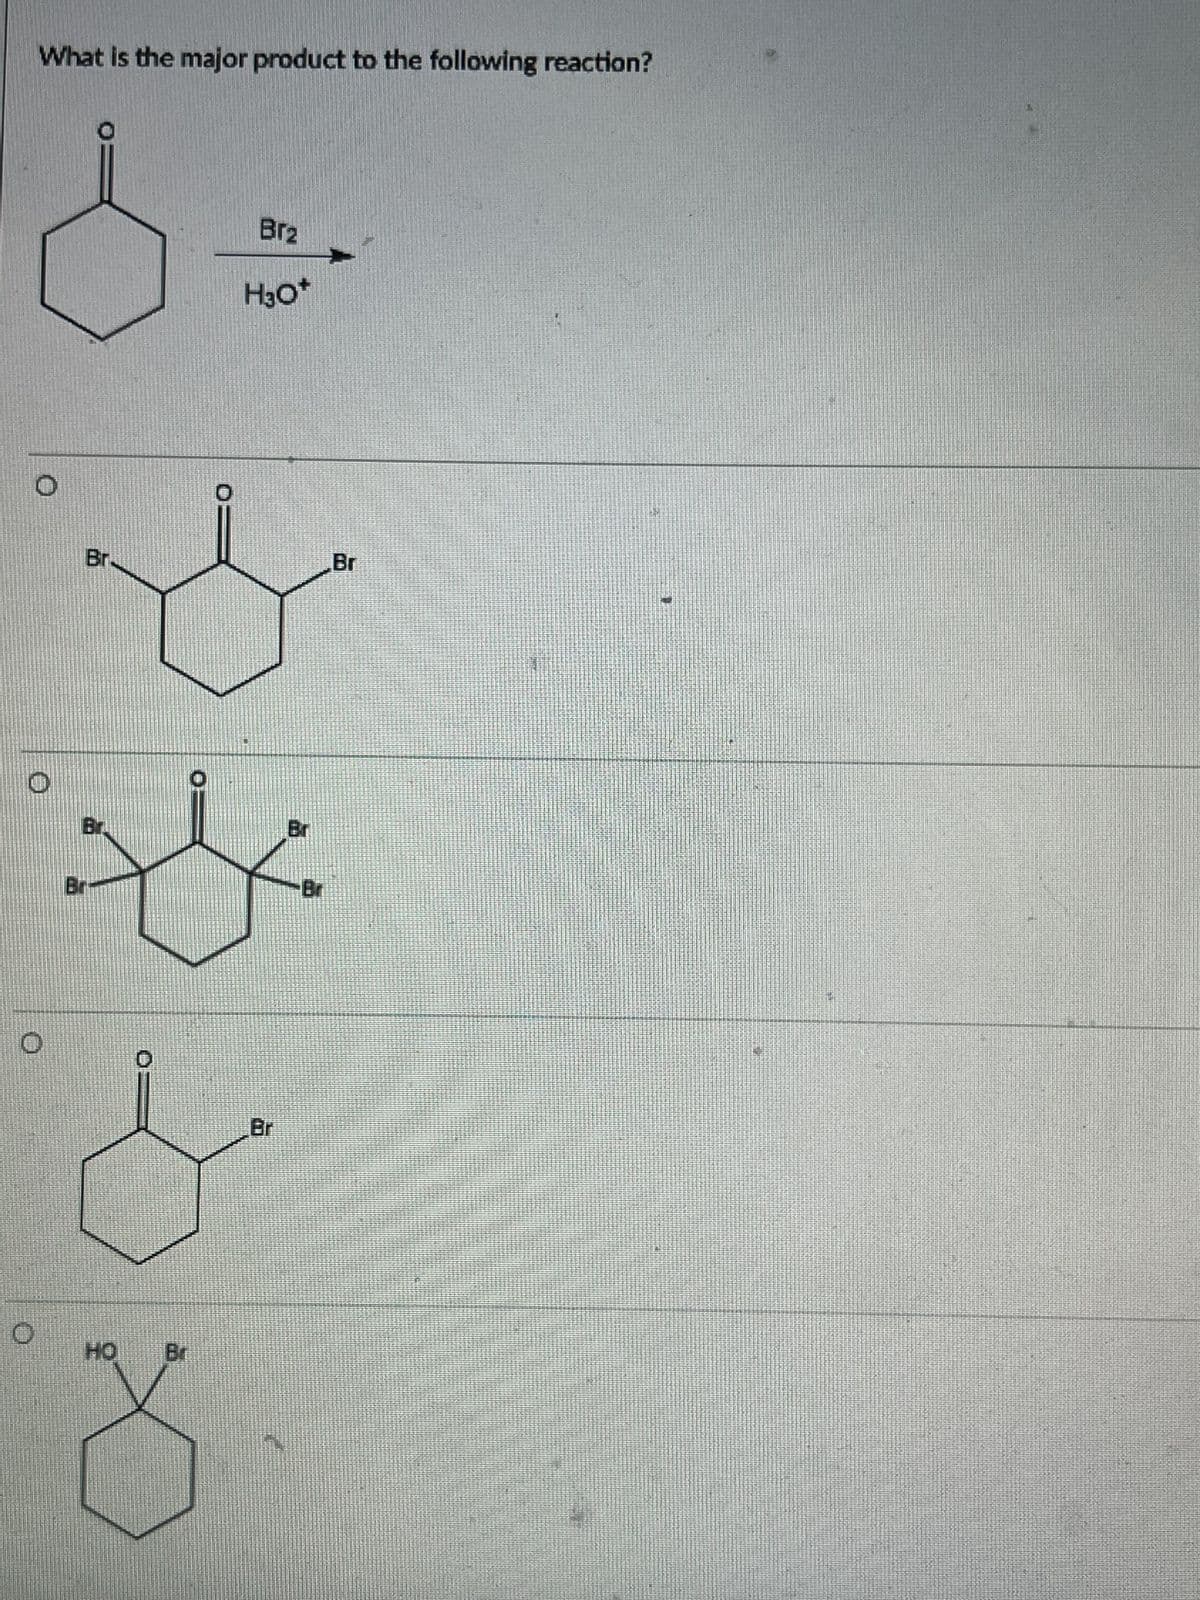 What is the major product to the following reaction?
0
O
Br
Br
Bram
9
Br2
H³O*
Br